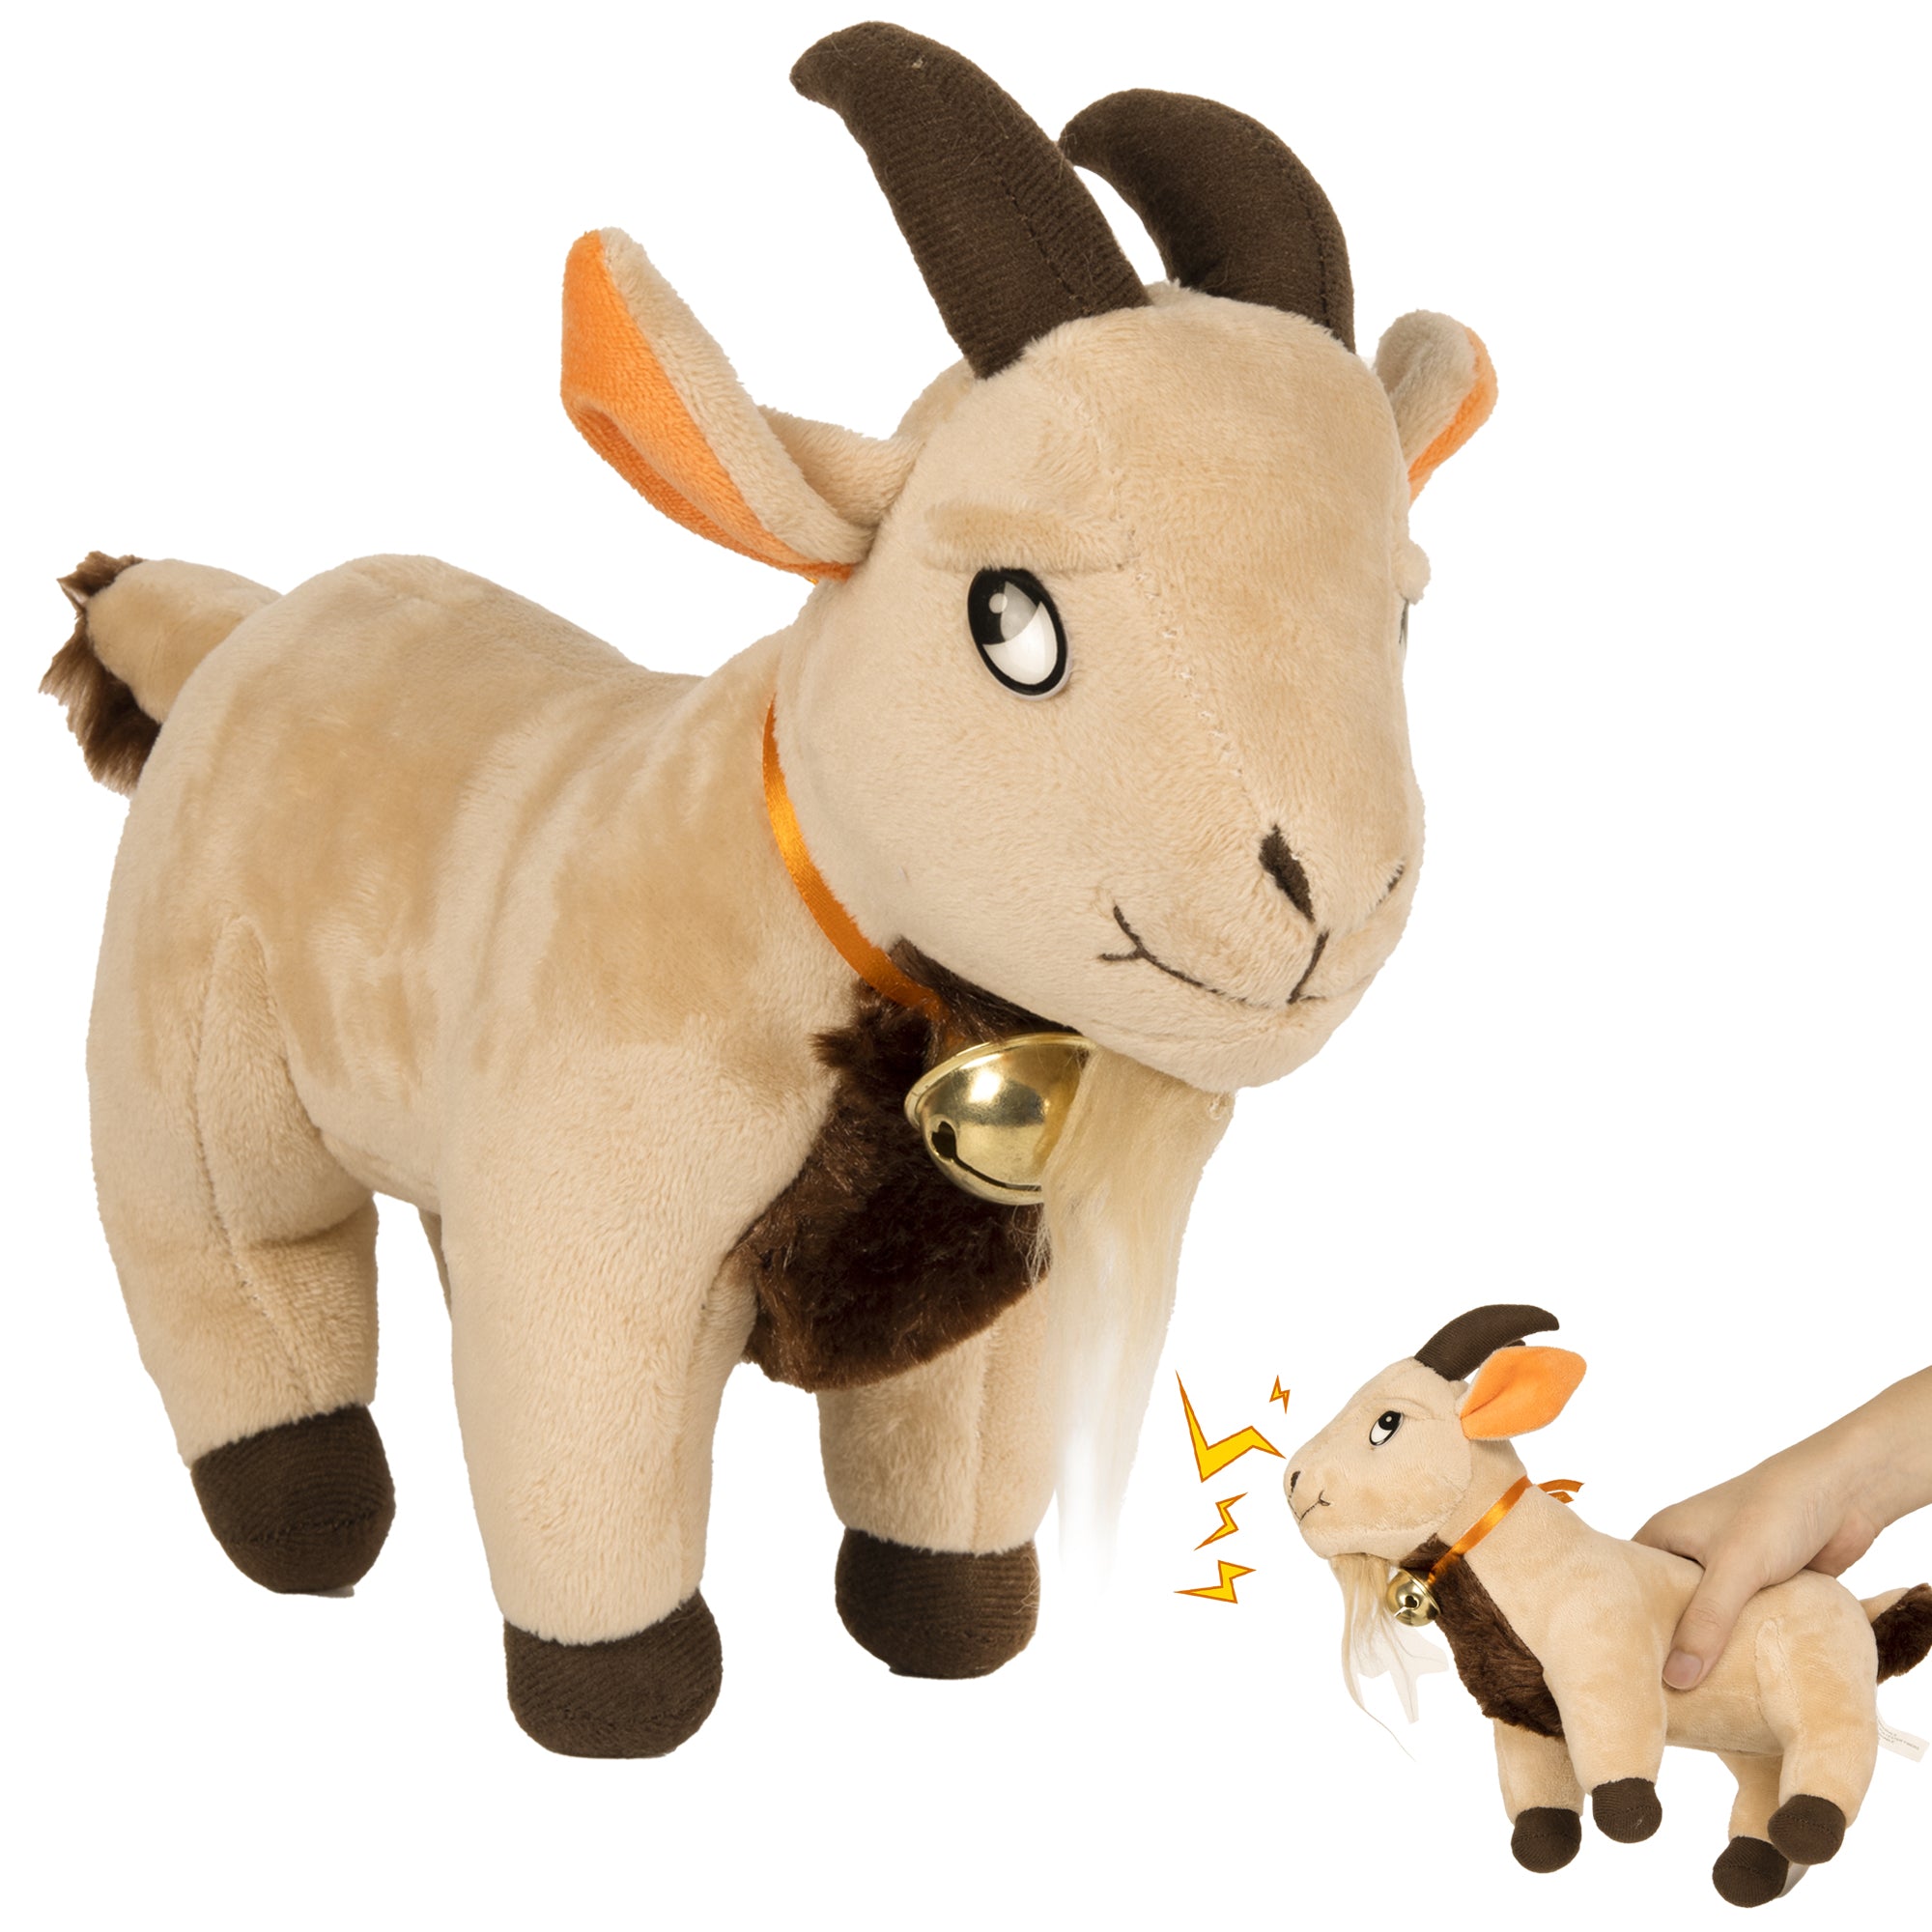 WYZOID Screaming Goat, Screaming Desk Toy Talking Button,Make Funny  Screaming Goat - Provide Interesting Gifts for Friends and Colleagues